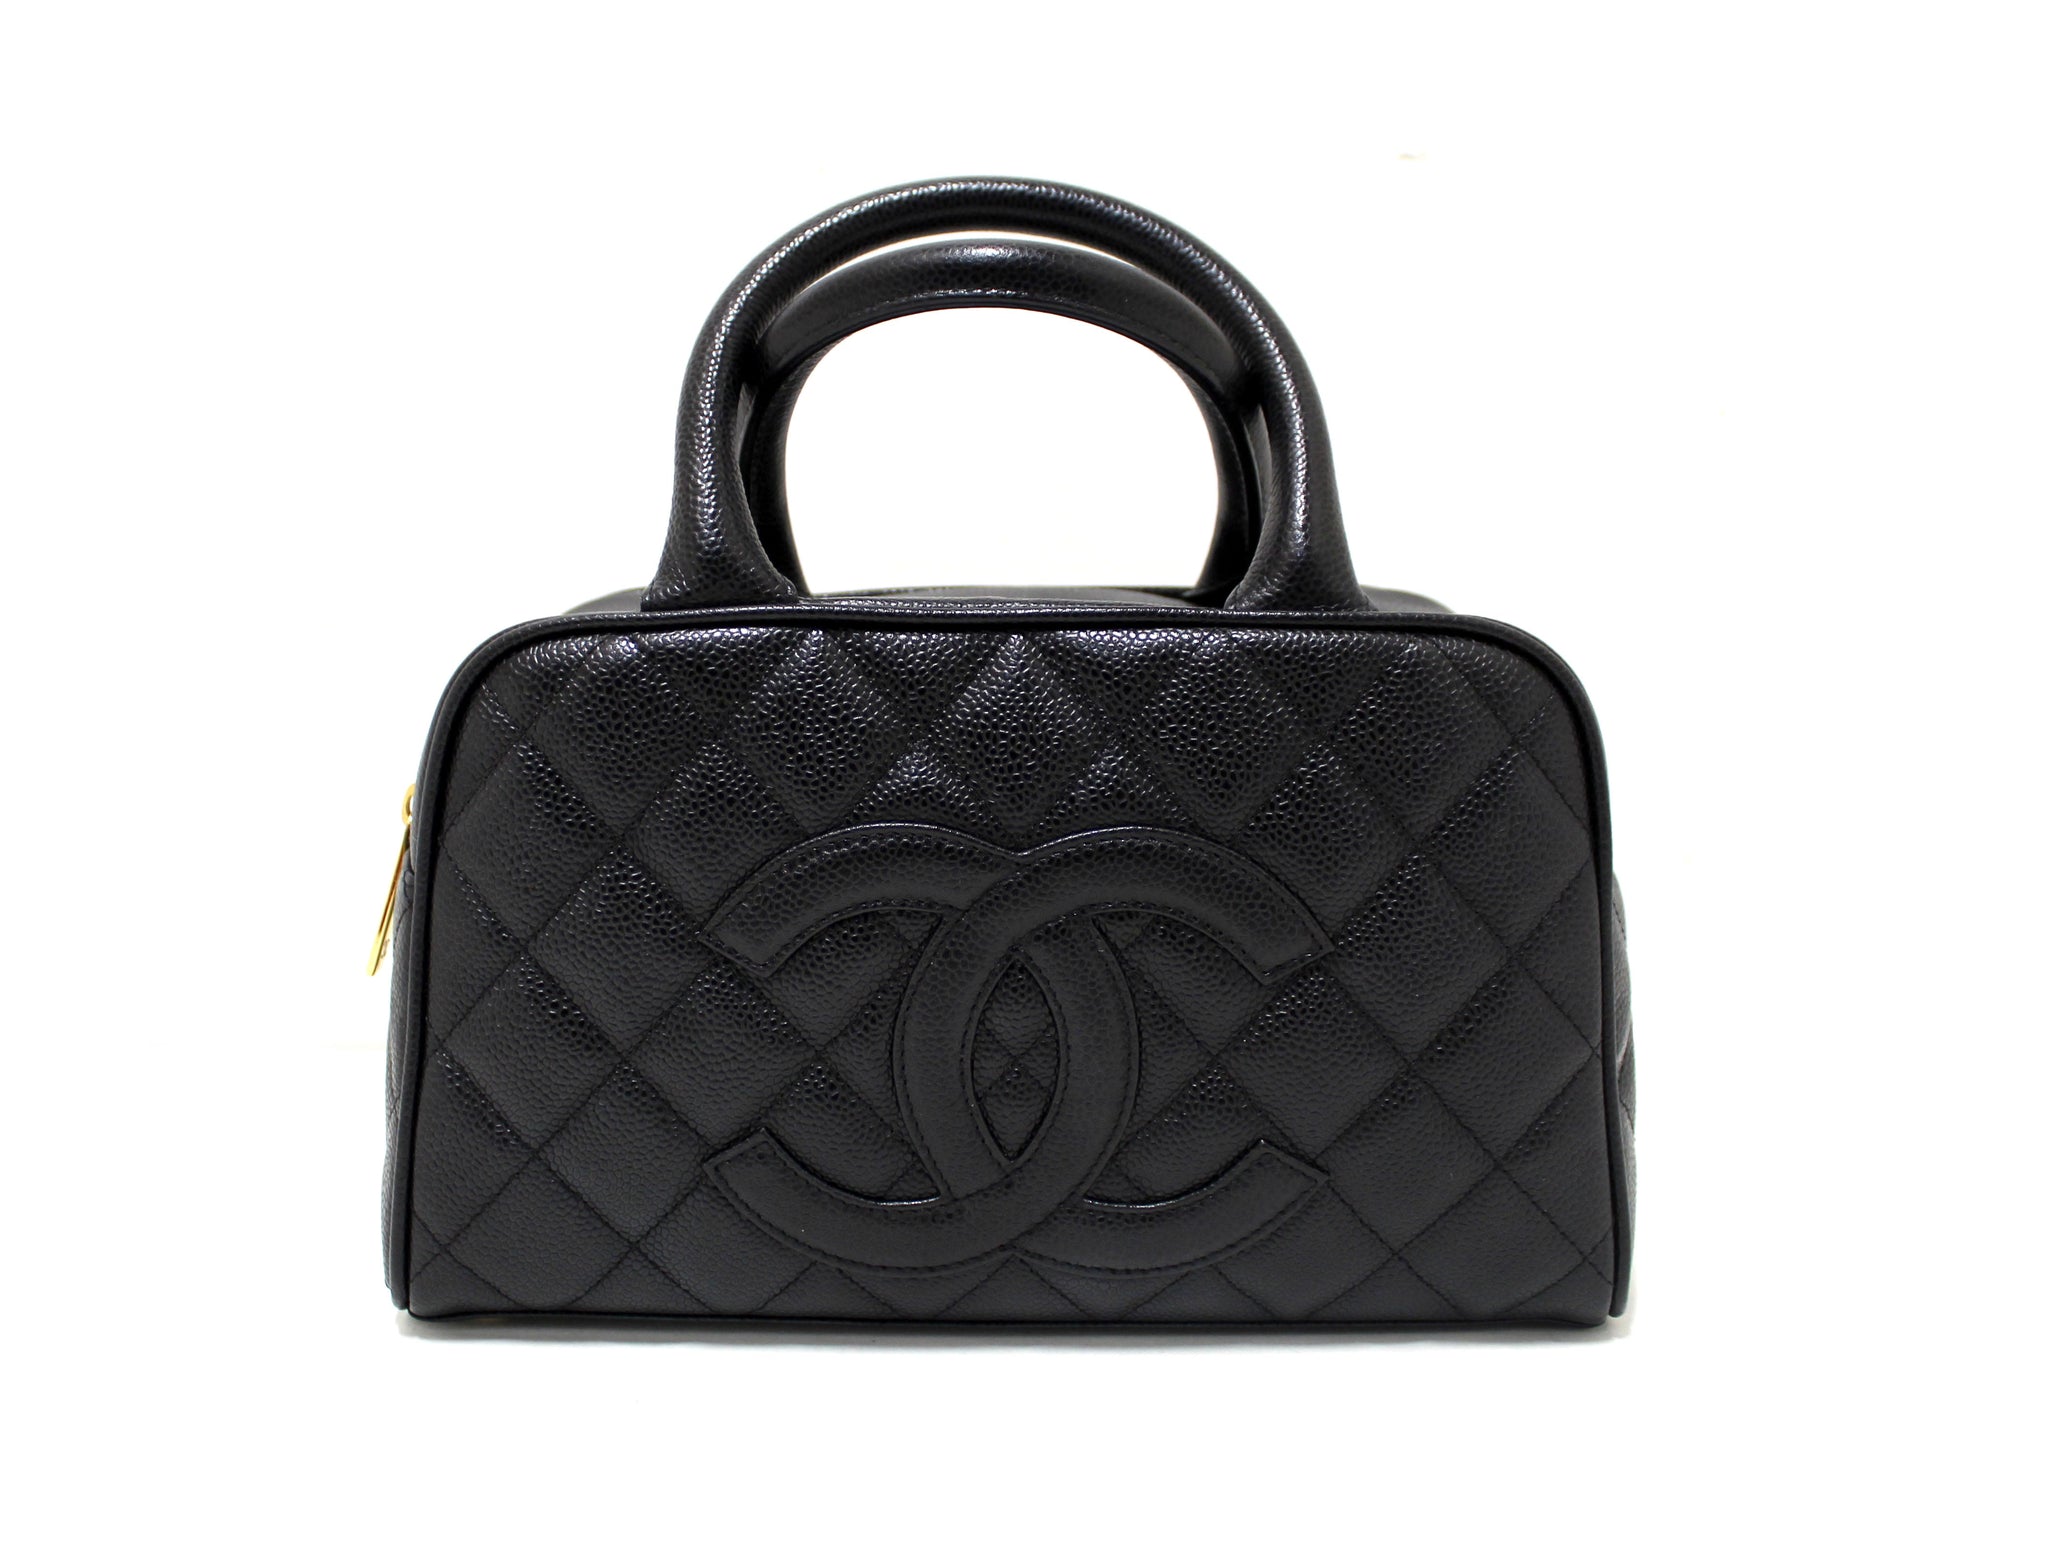 Chanel Black Caviar Quilted Leather Small Bowler Handbag – Italy Station